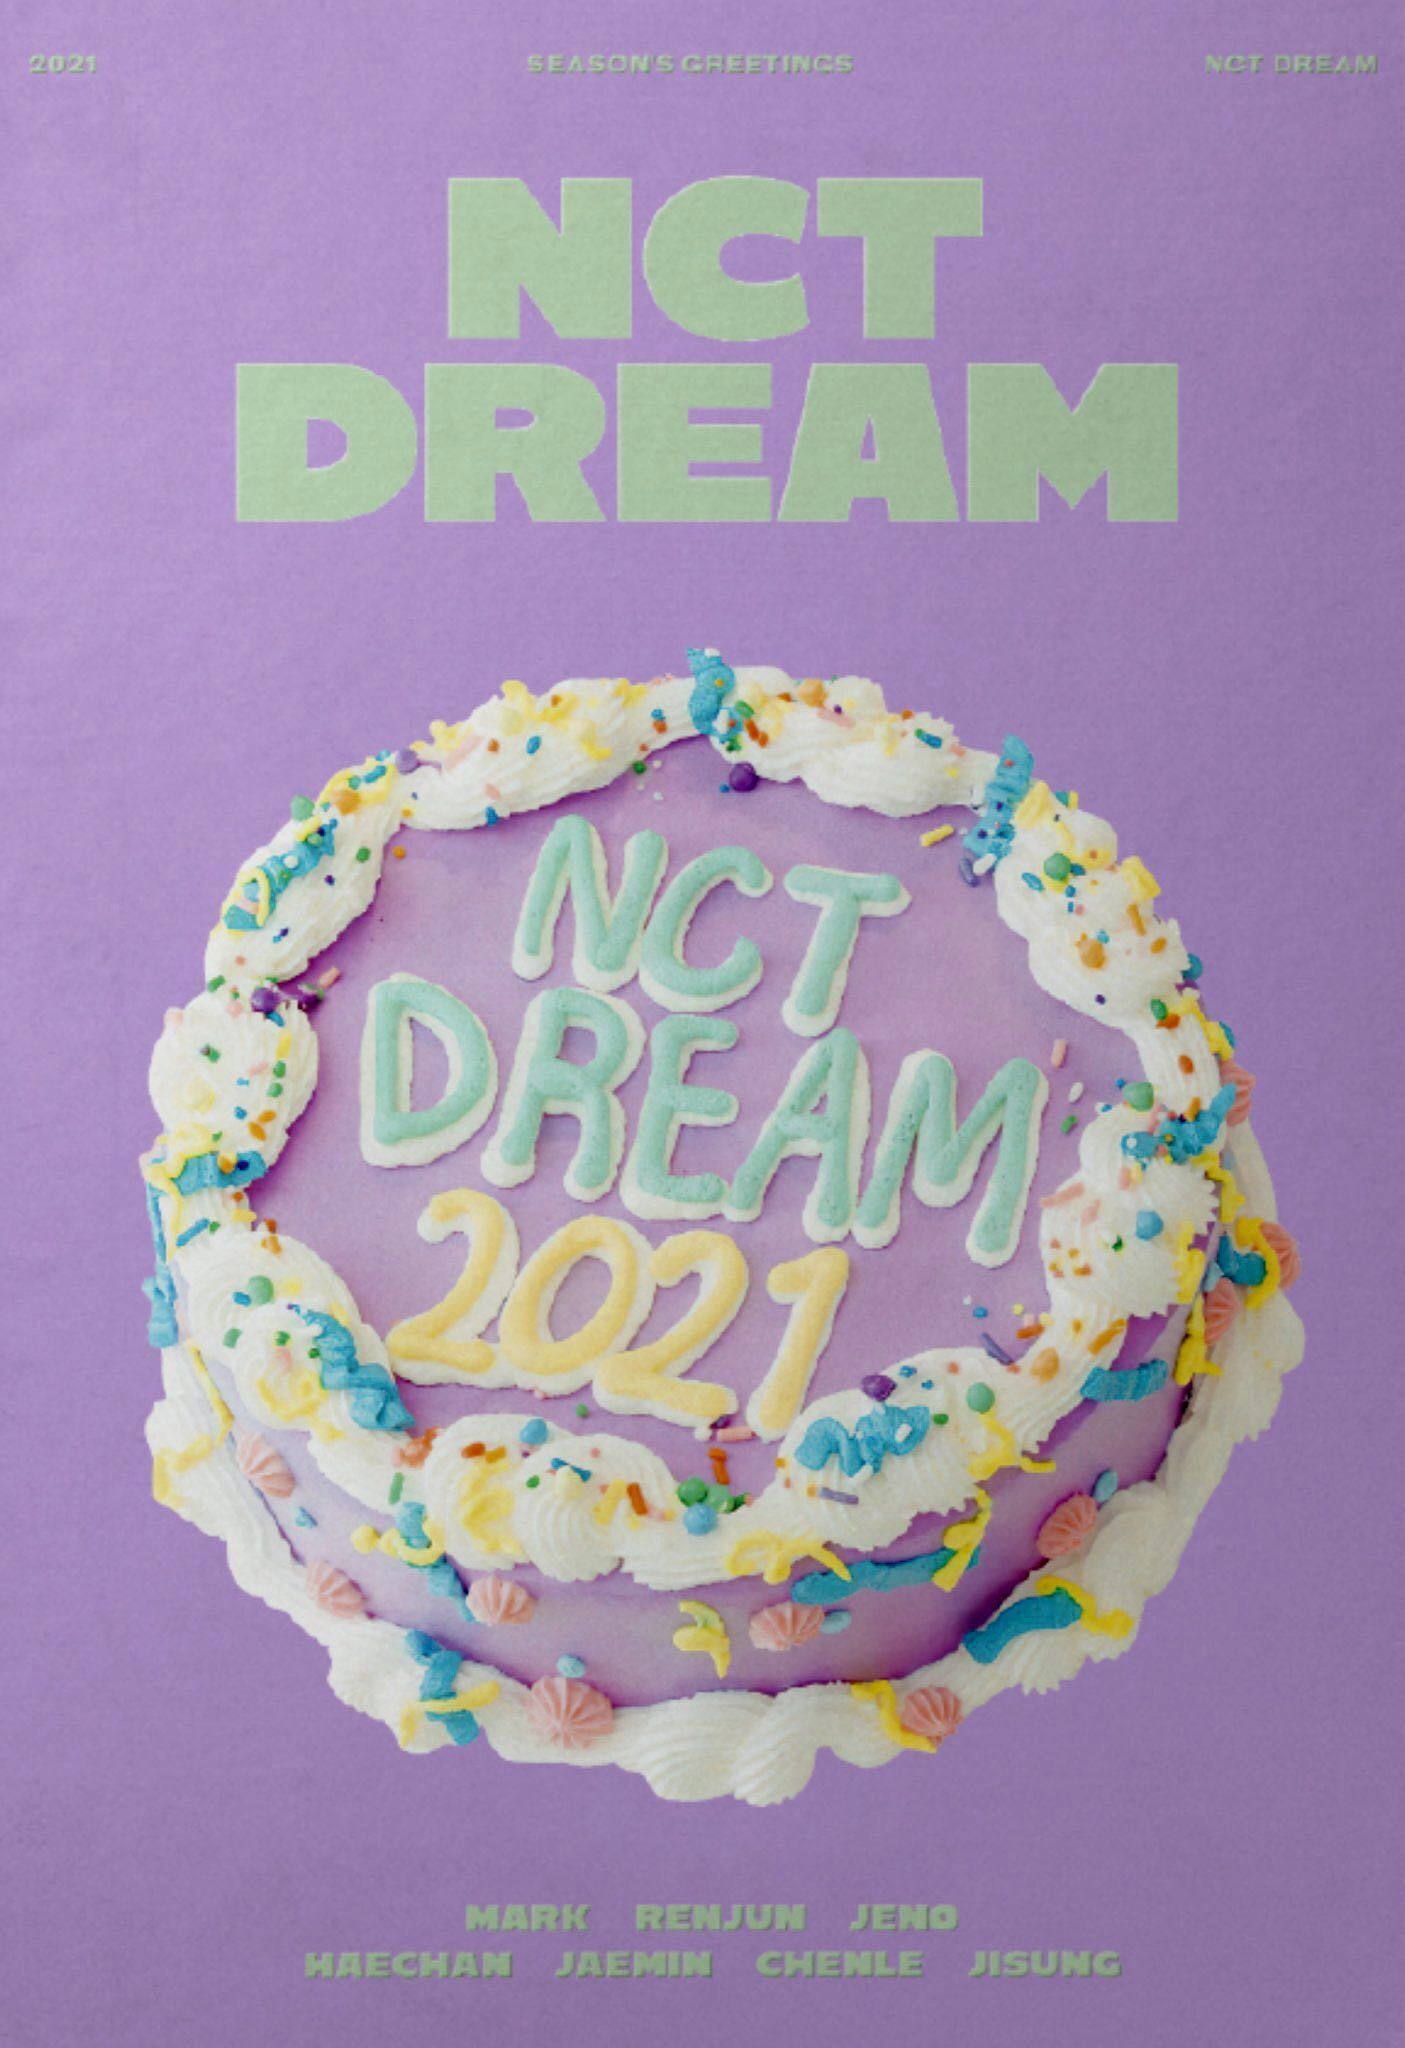 cza on Twitter. Nct dream, Nct, Cute birthday cakes